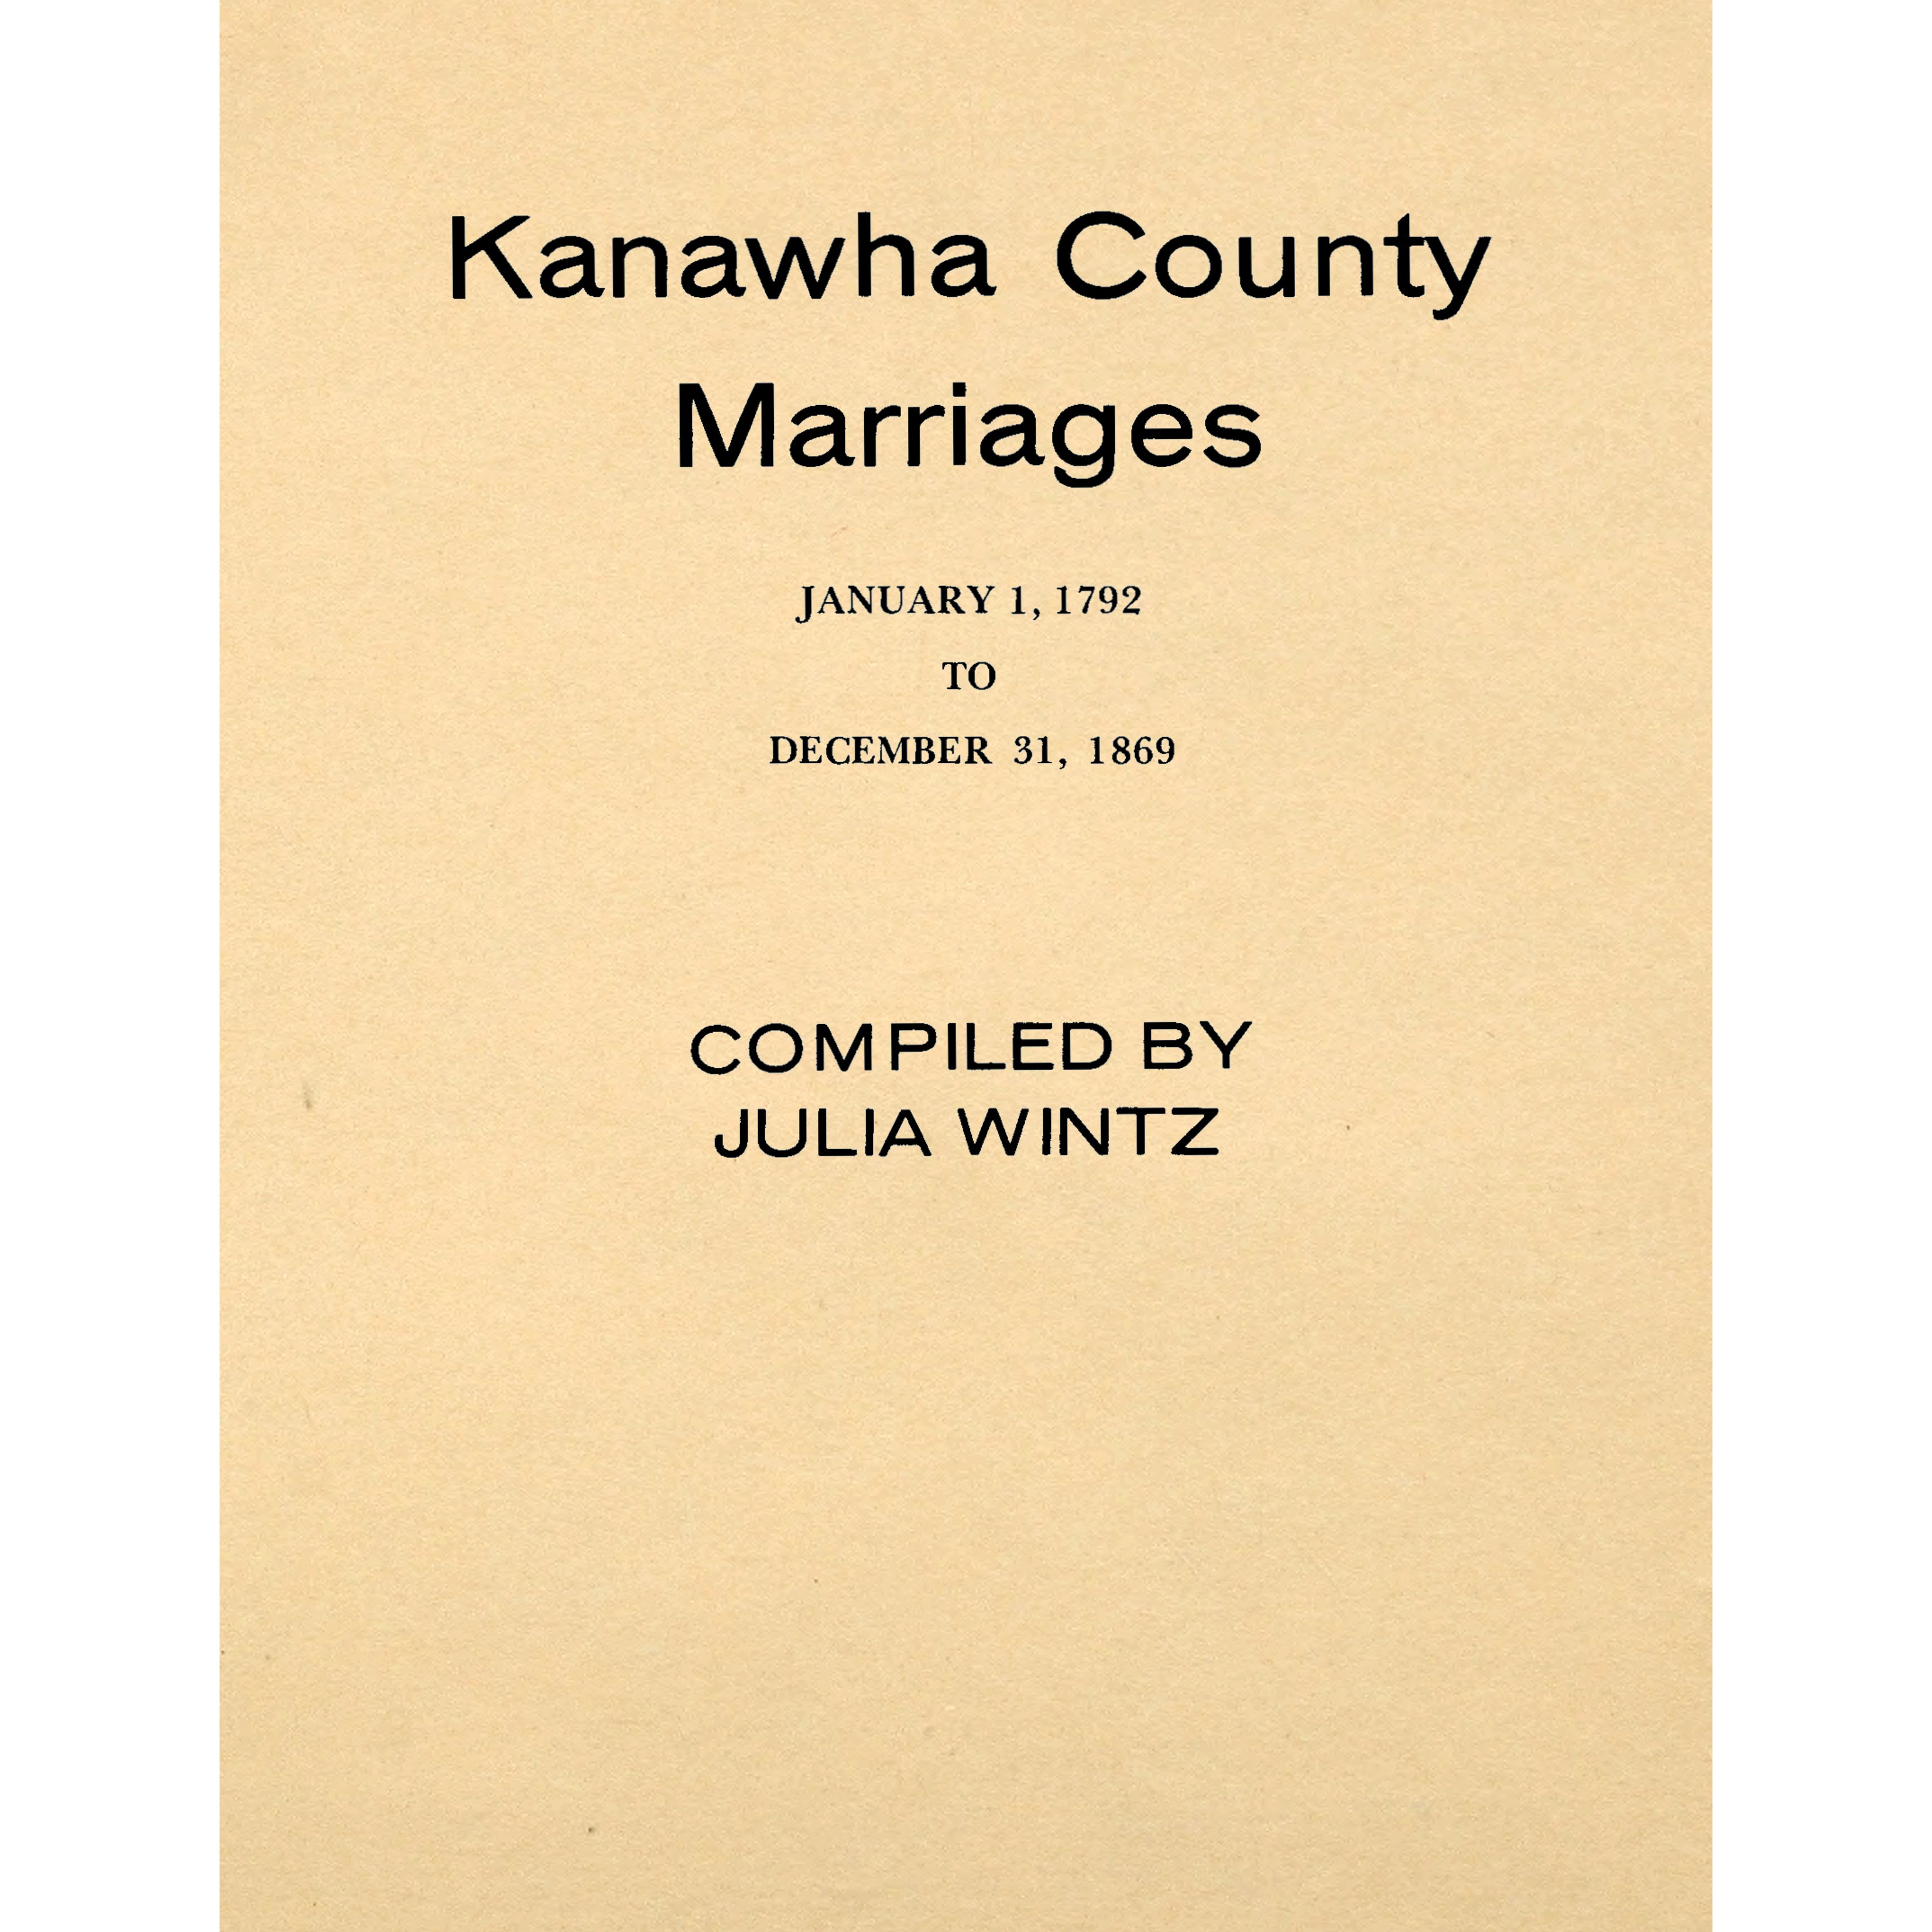 Kanawha County [West Virginia] Marriages,